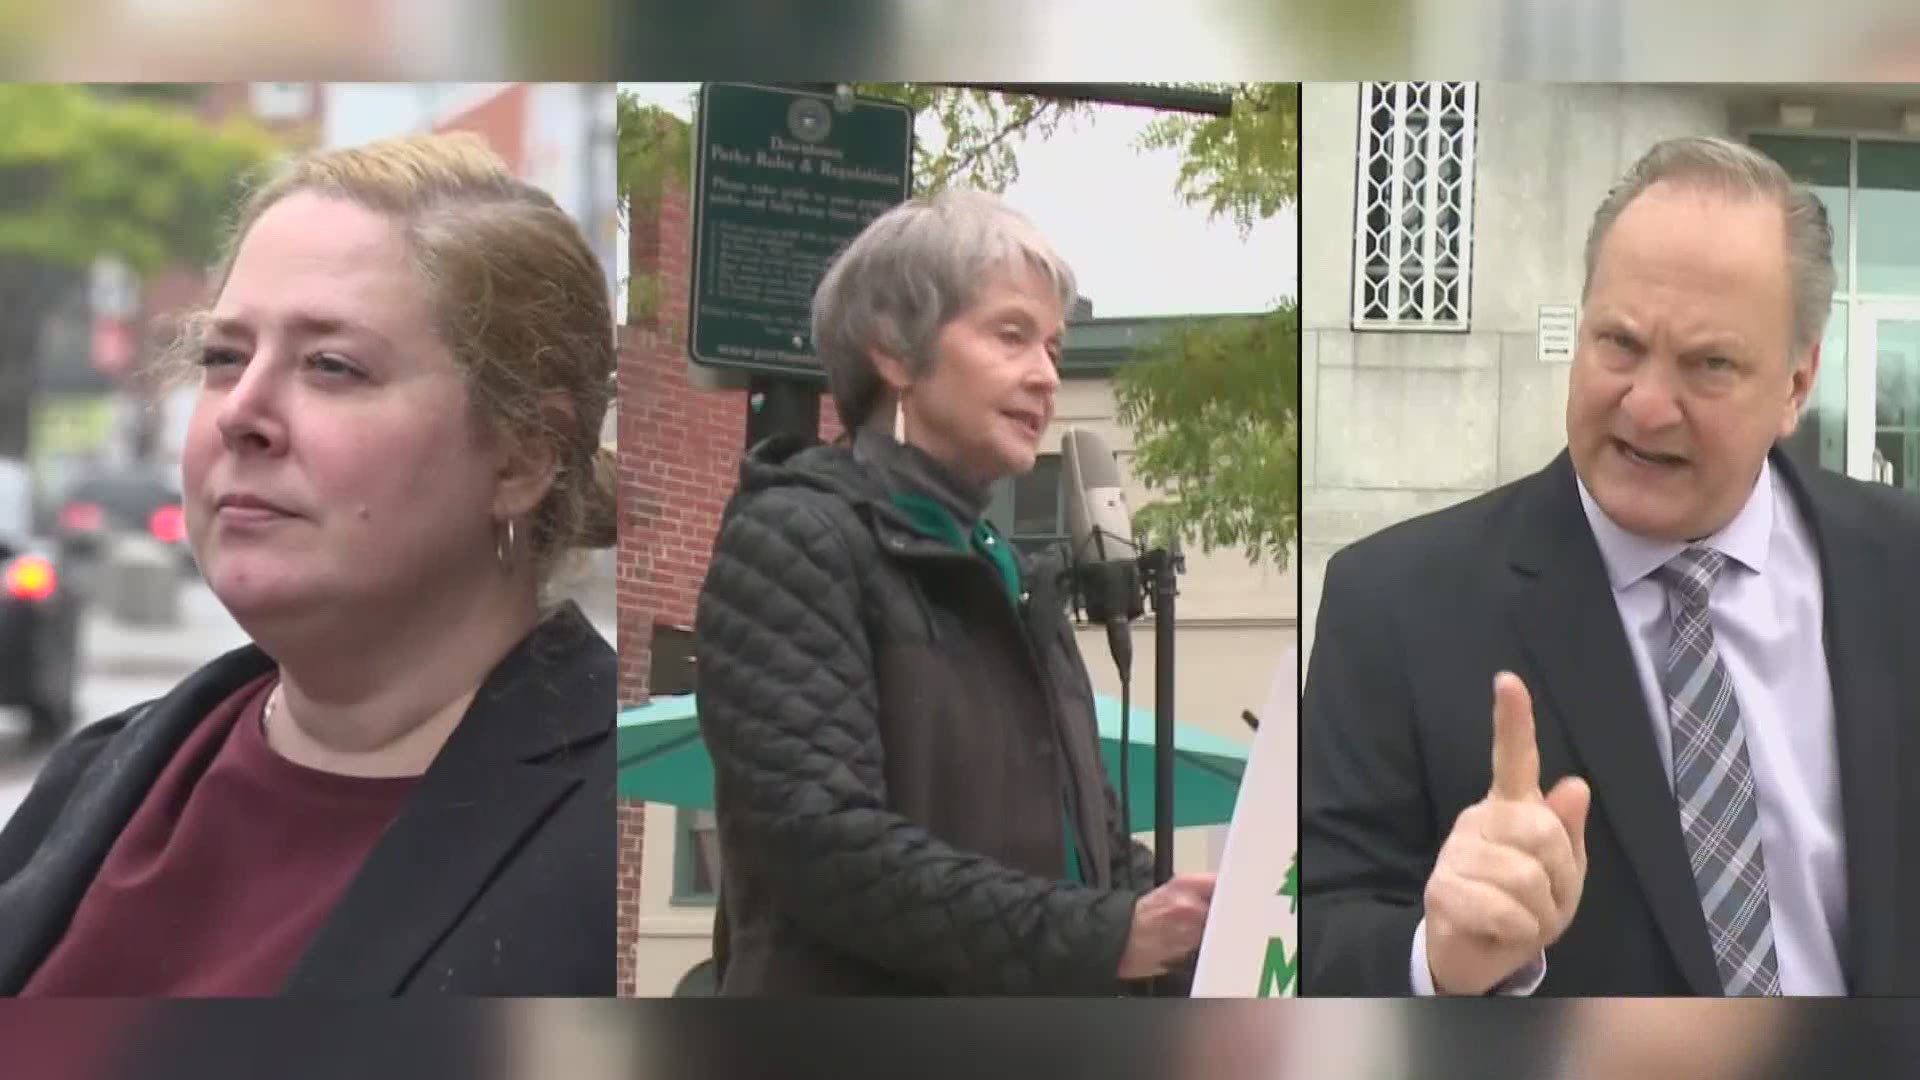 Candidates Lisa Savage, Max Linn and ballot hopeful Tiffany Bond look to connect with Maine voters in a U.S. Senate race with national attention